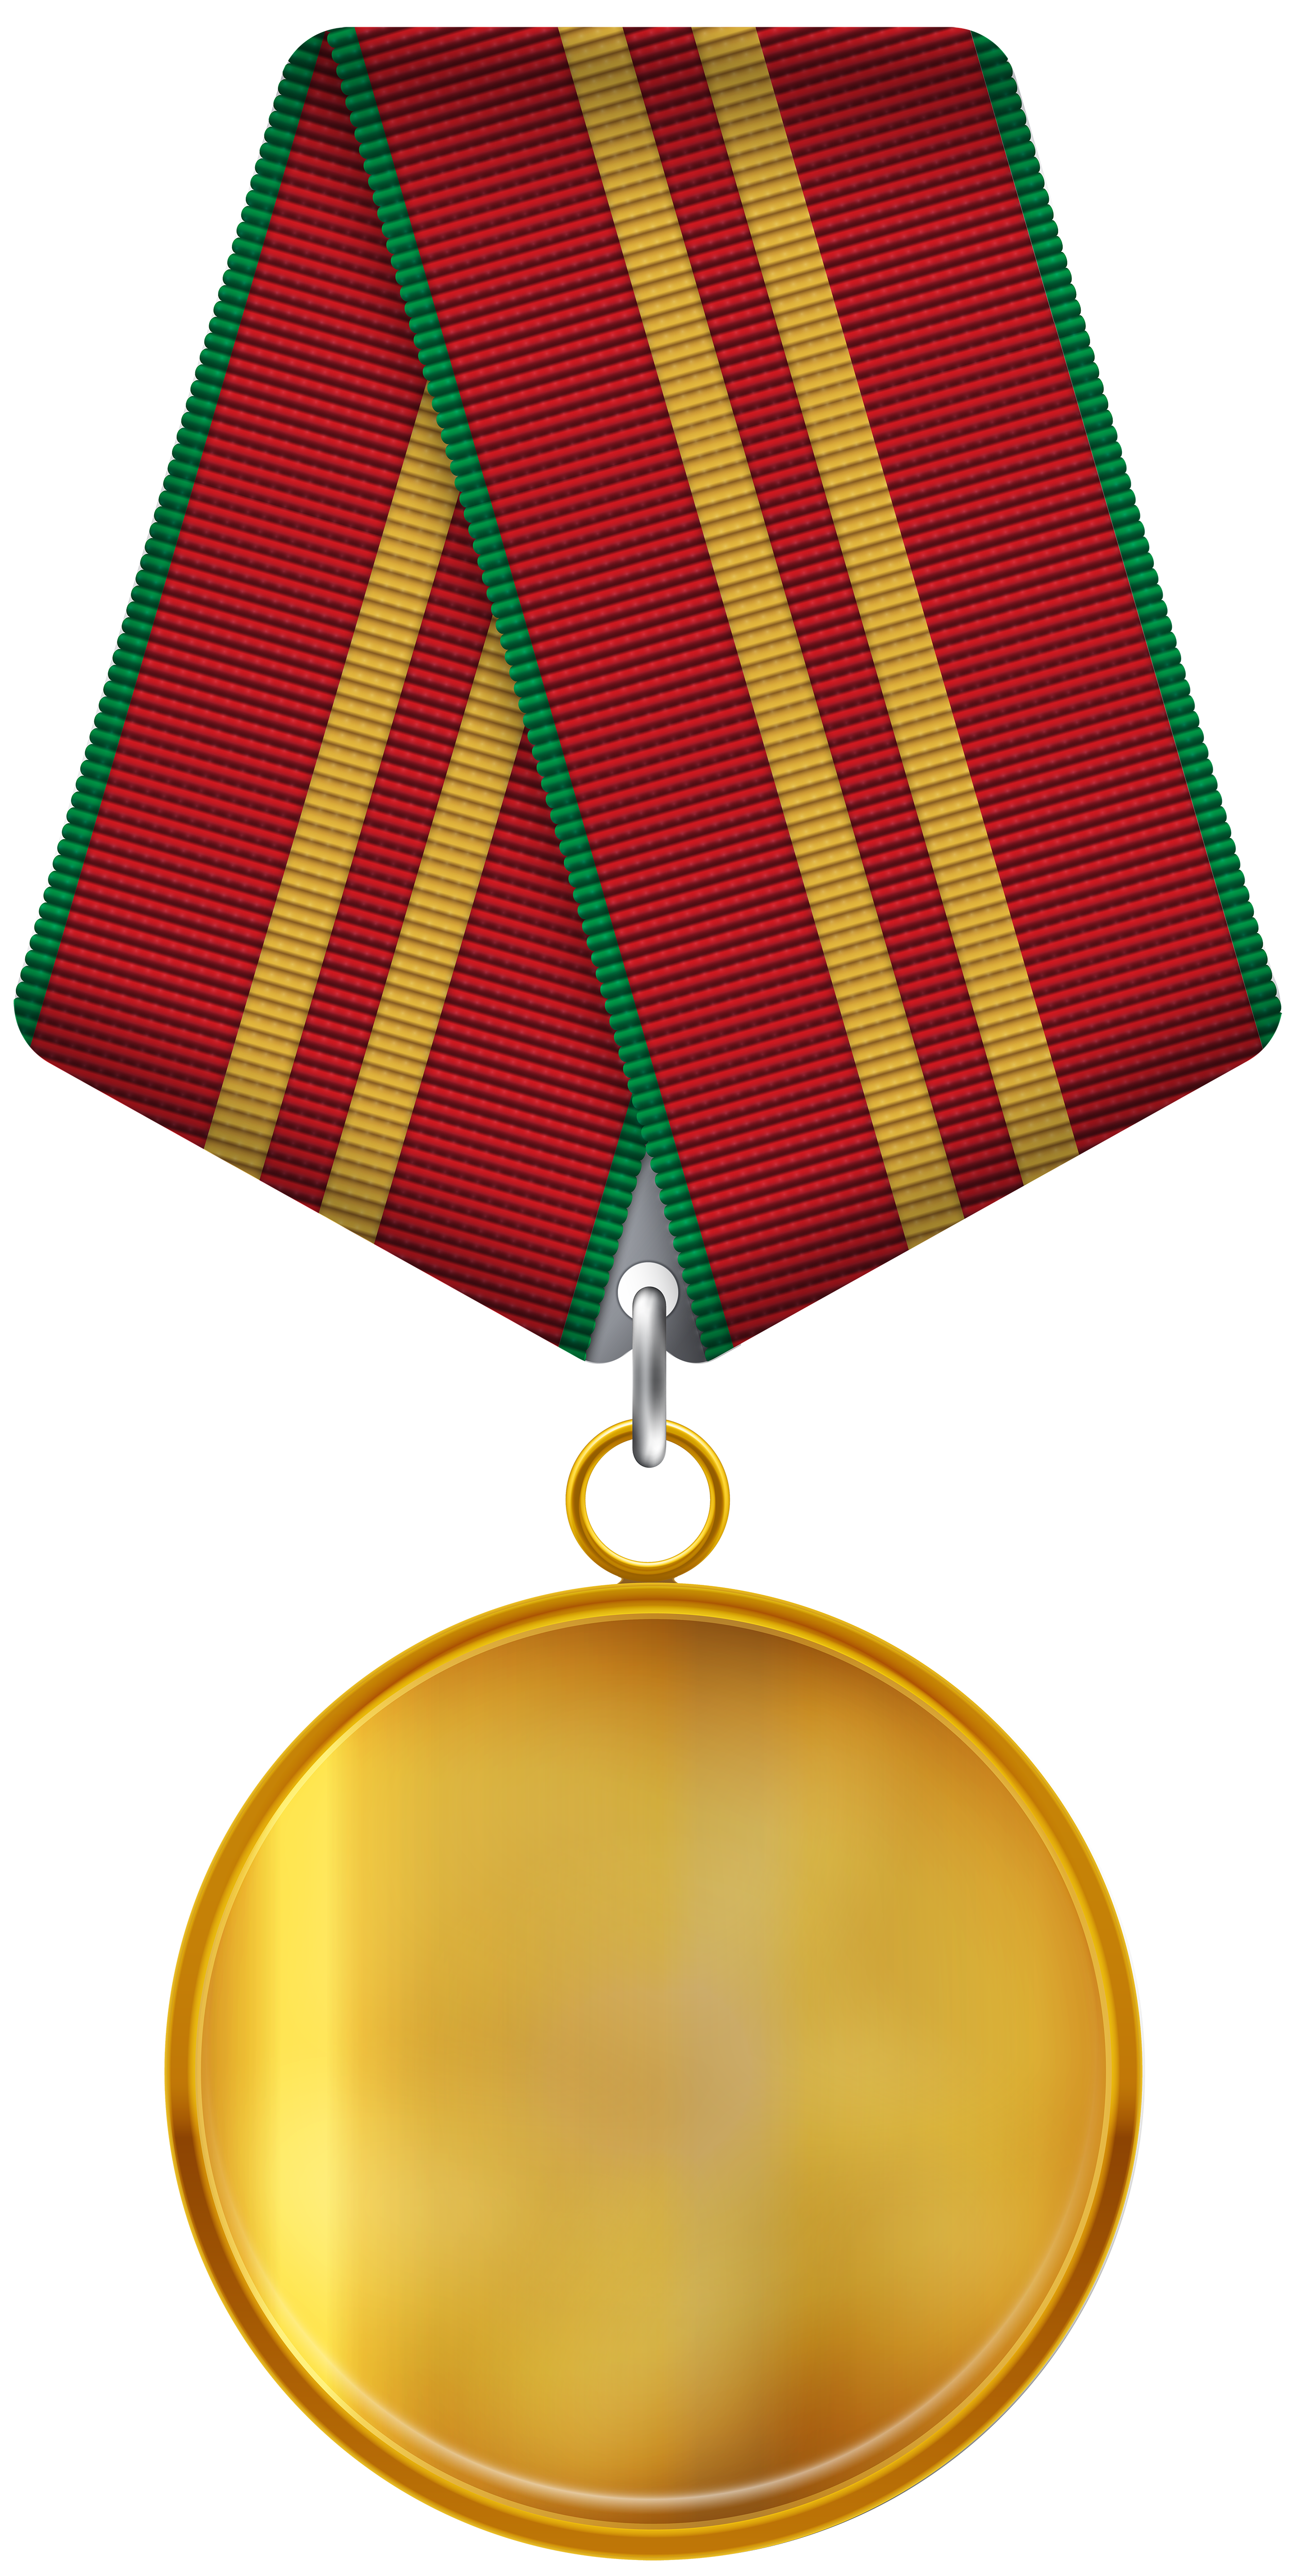 clipart images of medals - photo #40